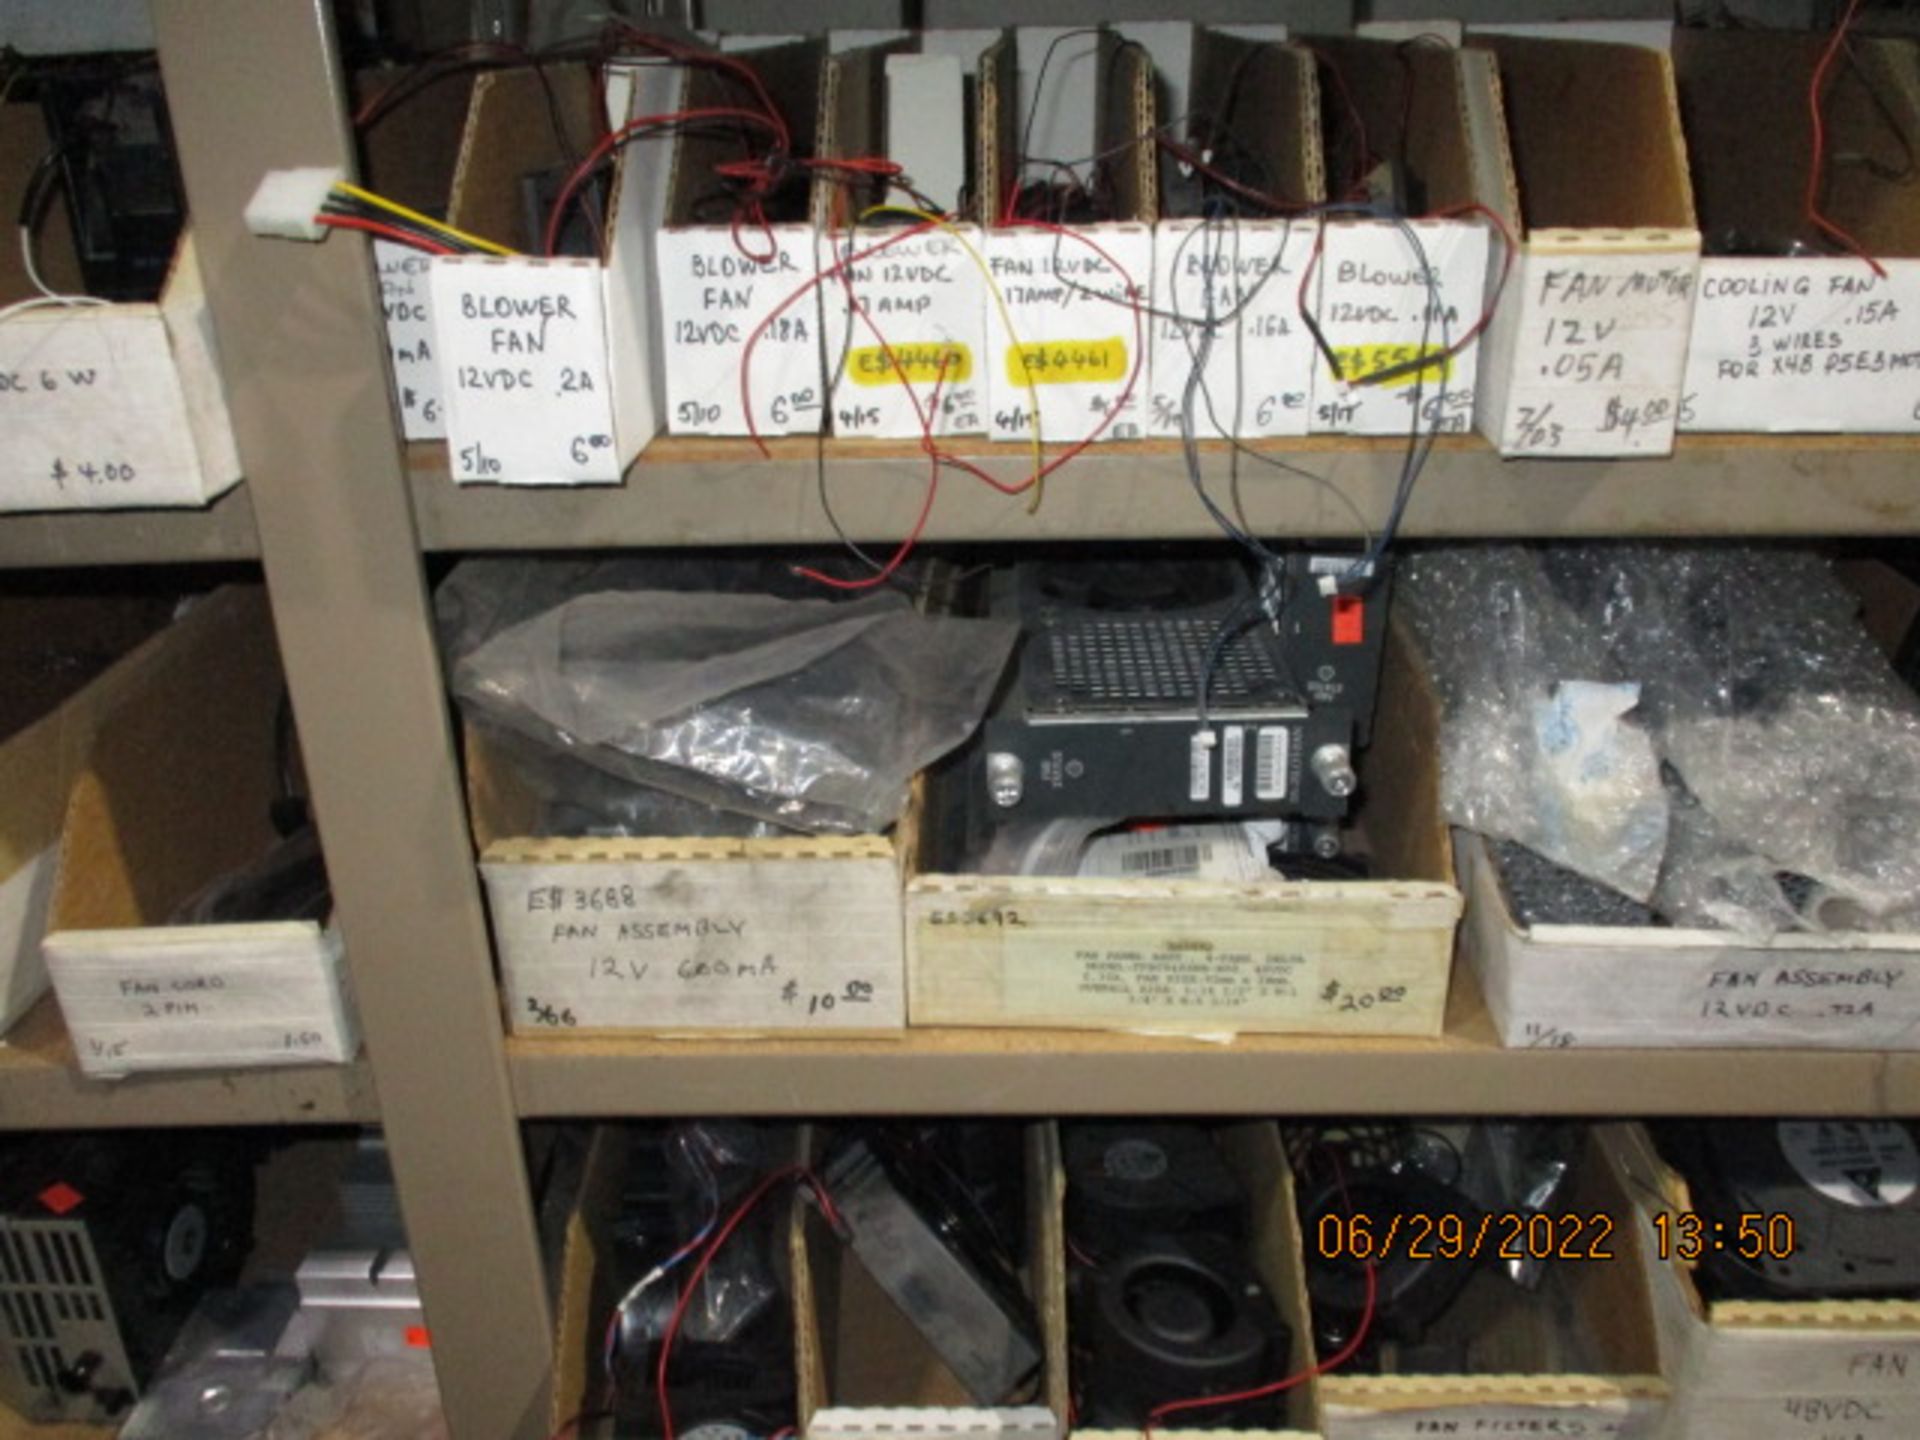 CONTENTS OF SHELVING UNIT CONSISTING OF ASSORTMENT OF FANS AND FAN ACCESSORIES - Image 5 of 13